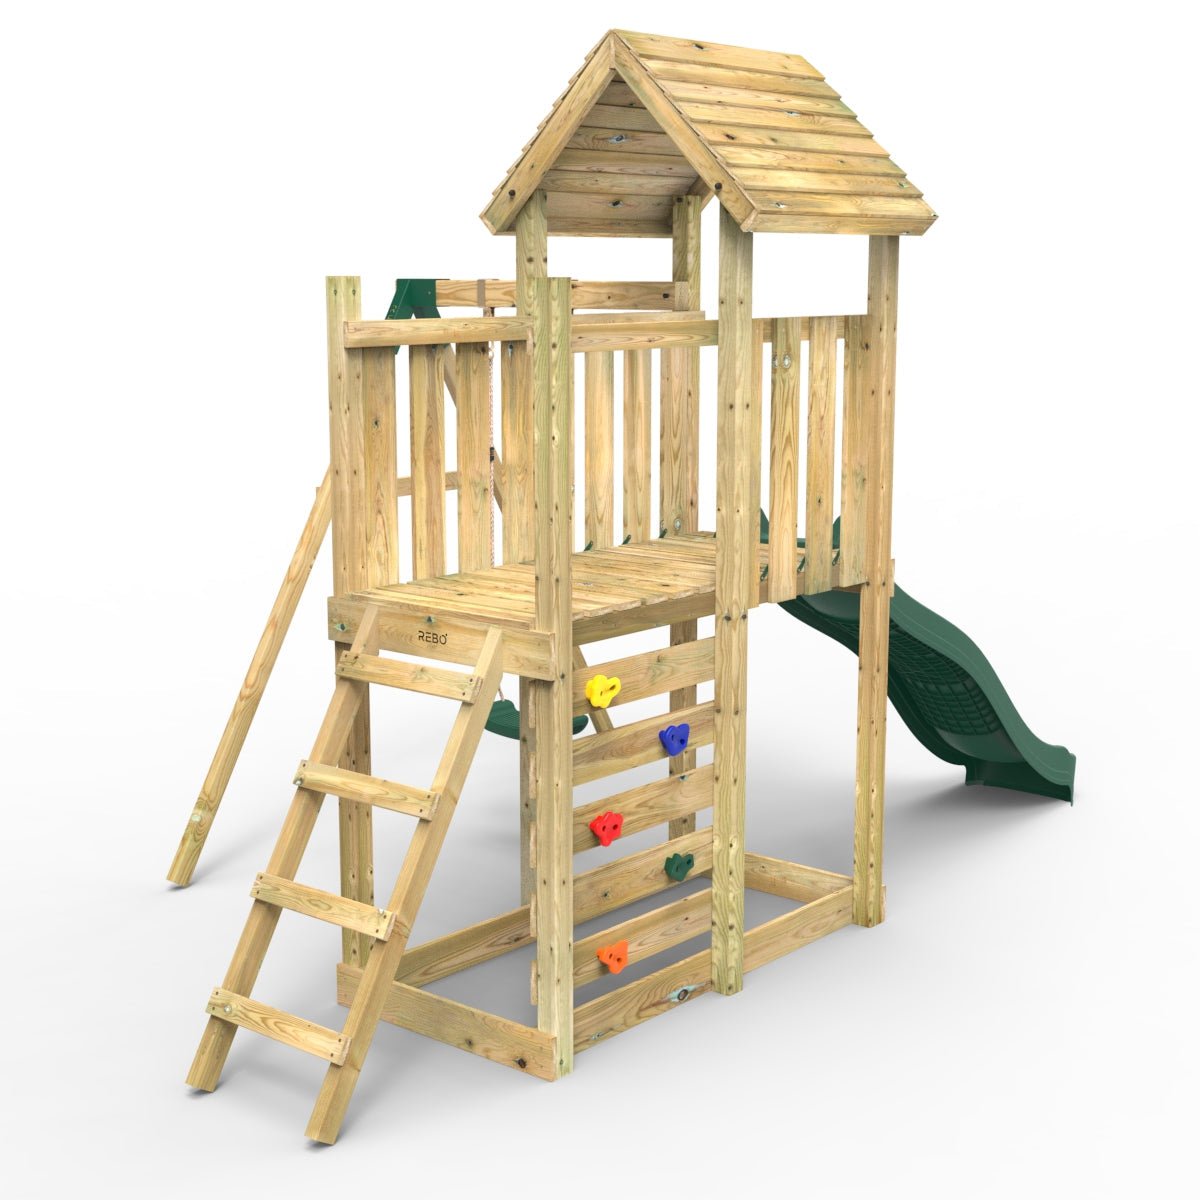 Rebo Extended Tower Wooden Climbing Frame with Swings & Slide - Rushmore